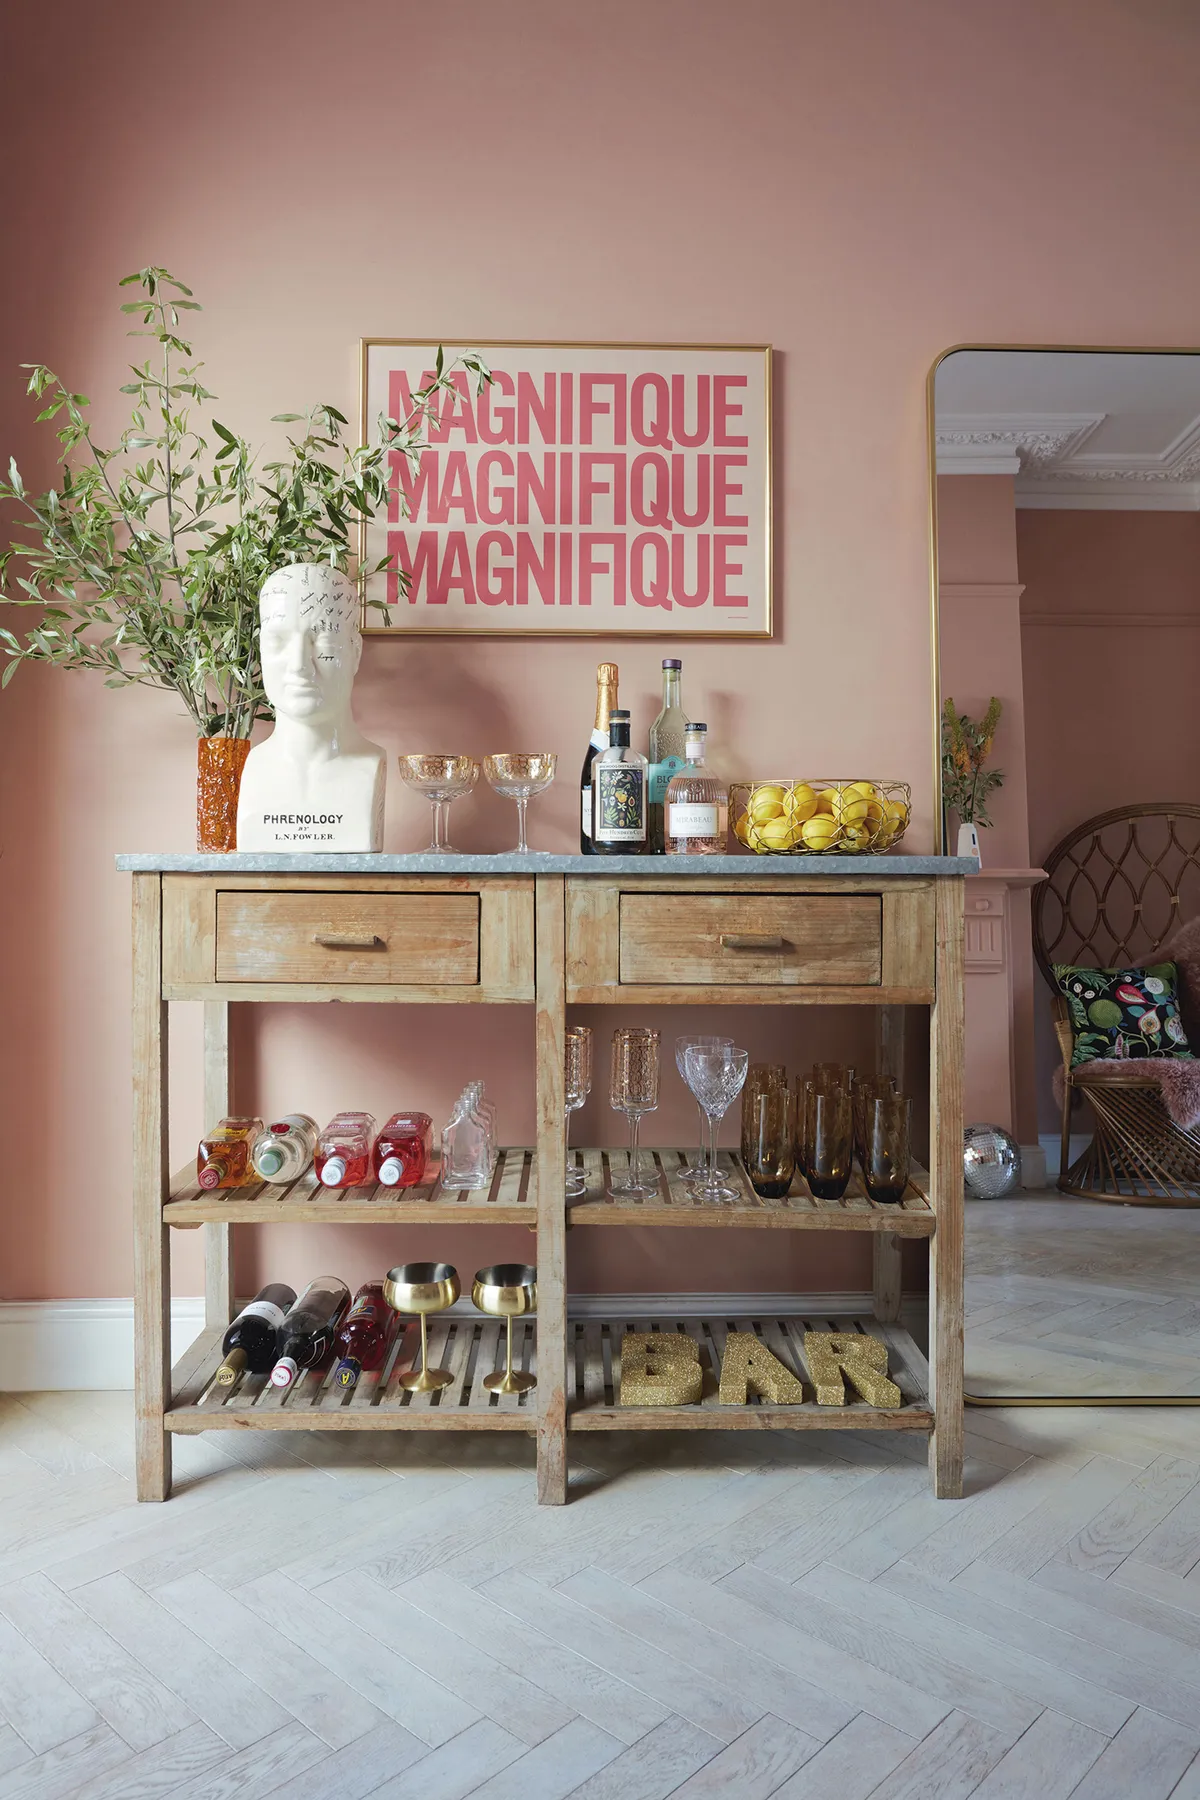 ‘The distressed table was a vintage find and I thought it would make a perfect drinks table.’ Styled with bottles and cocktail glasses, Natalie has created a fun-filled entertaining space, with the ‘Magnifique’ print adding to the party atmosphere. For a similar drinks cabinet, try Nkuku